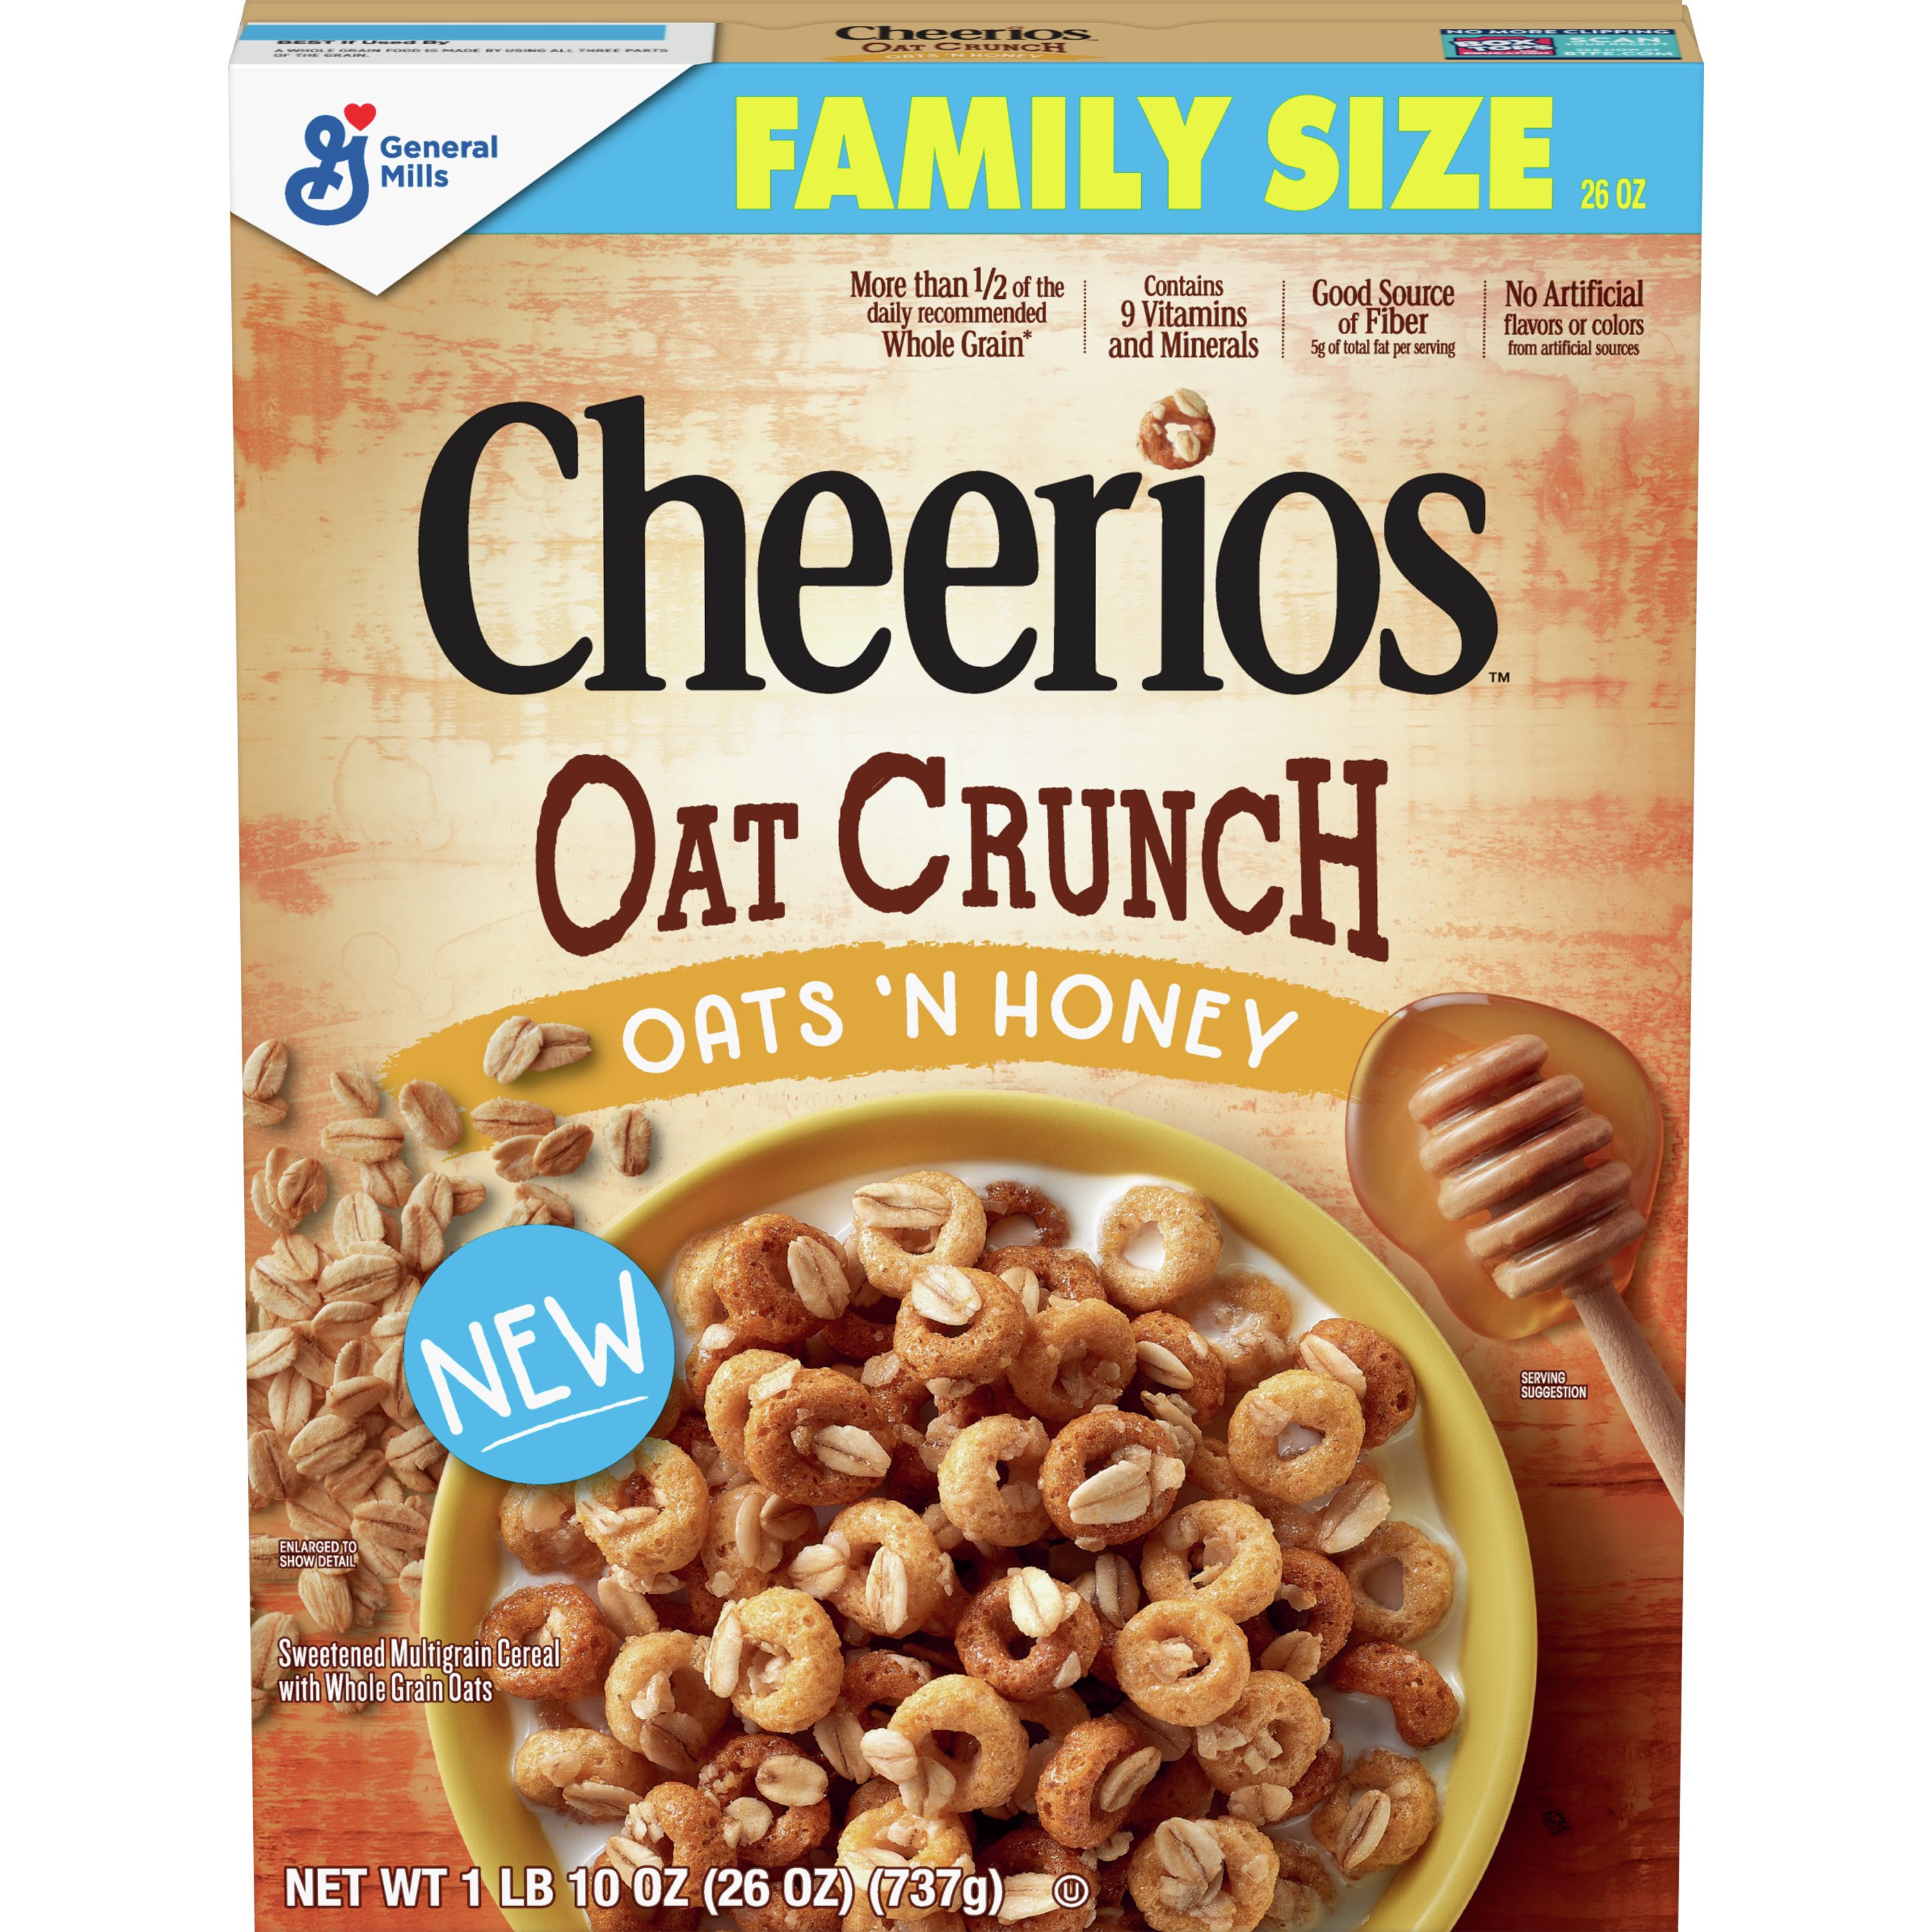 News: Cheerios Oat Crunch – Oats 'N Honey Cereal! - Cerealously